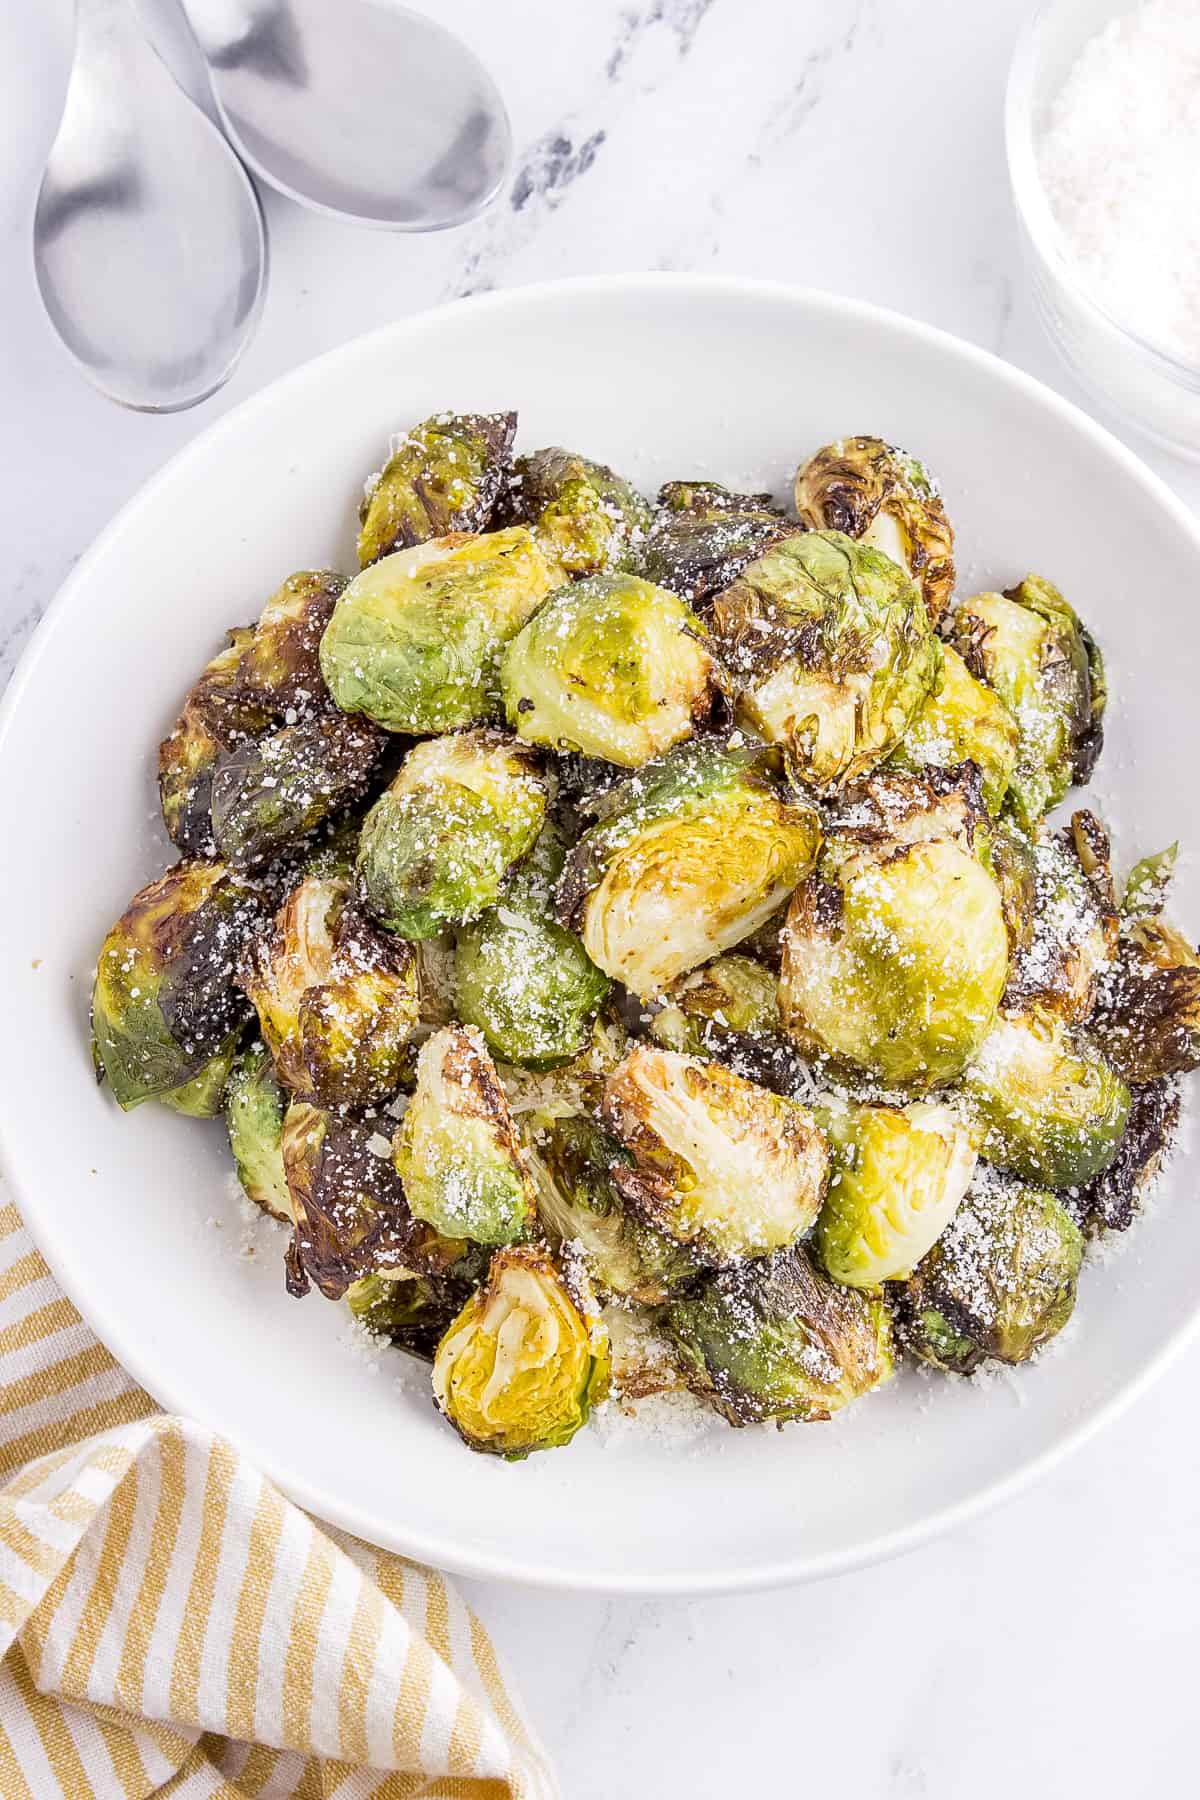 Image if Brussel Sprouts with a Balsamic glaze in a small white bowl. 